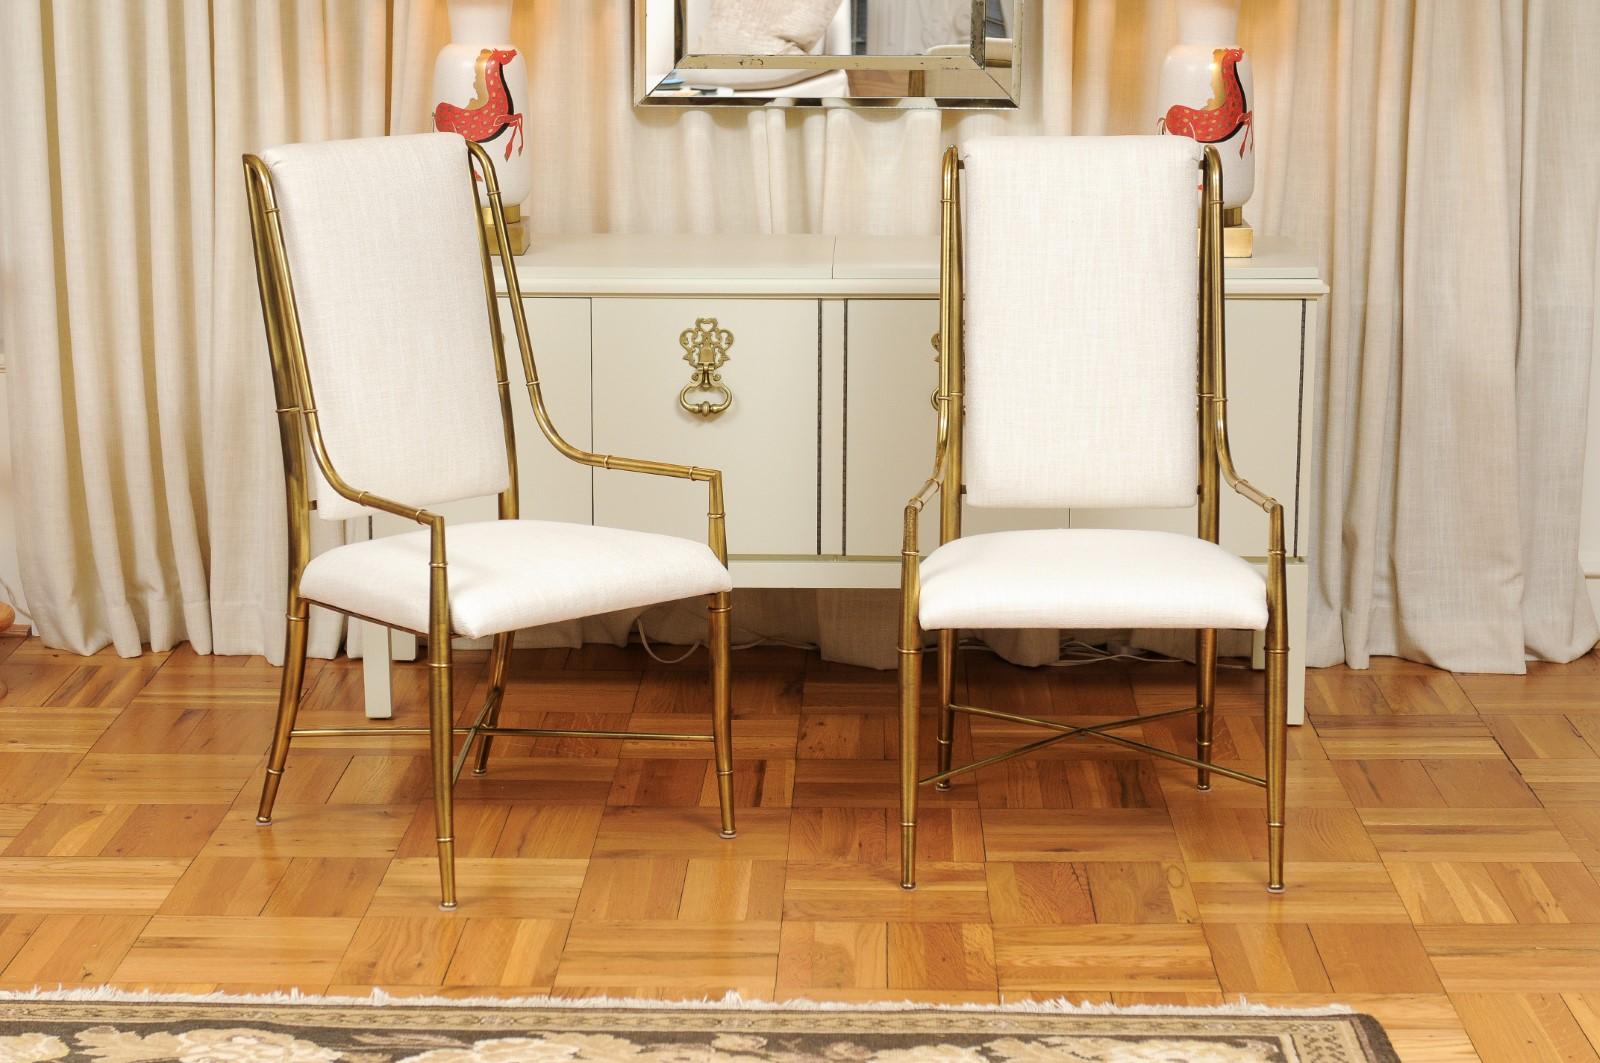 These magnificent dining chairs are shipped as professionally photographed and described in the listing narrative: Completely installation ready. Expert custom upholstery service available.

An exquisite set of eight (8) solid brass faux bamboo